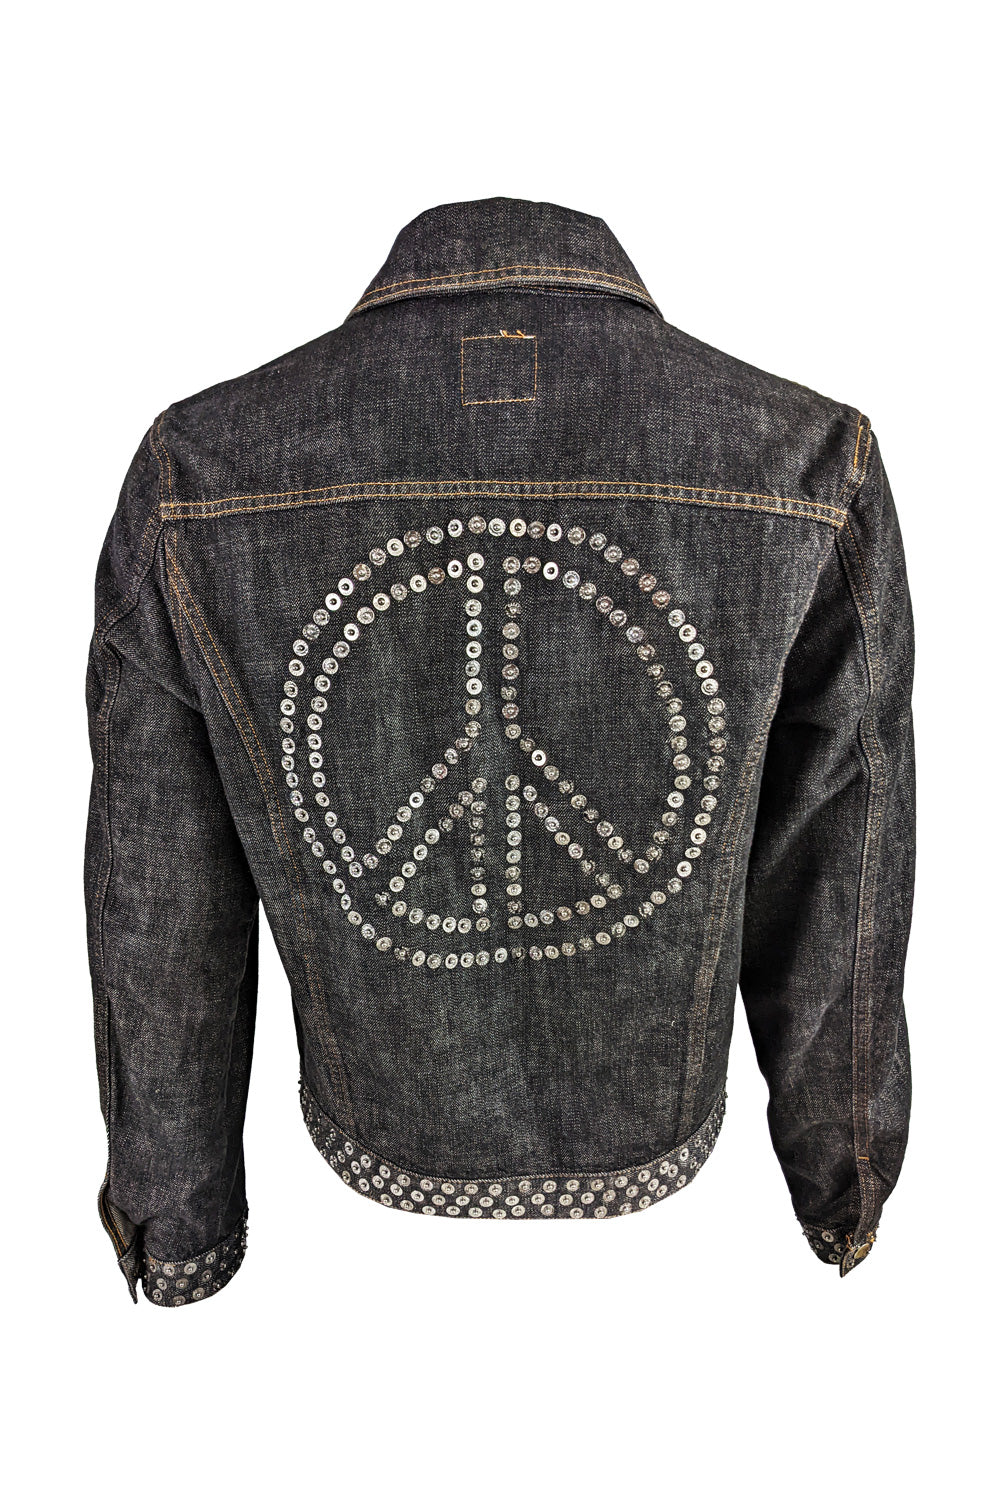 Moschino Vintage Mens Denim Jacket with Studded Peace Sign, 1990s